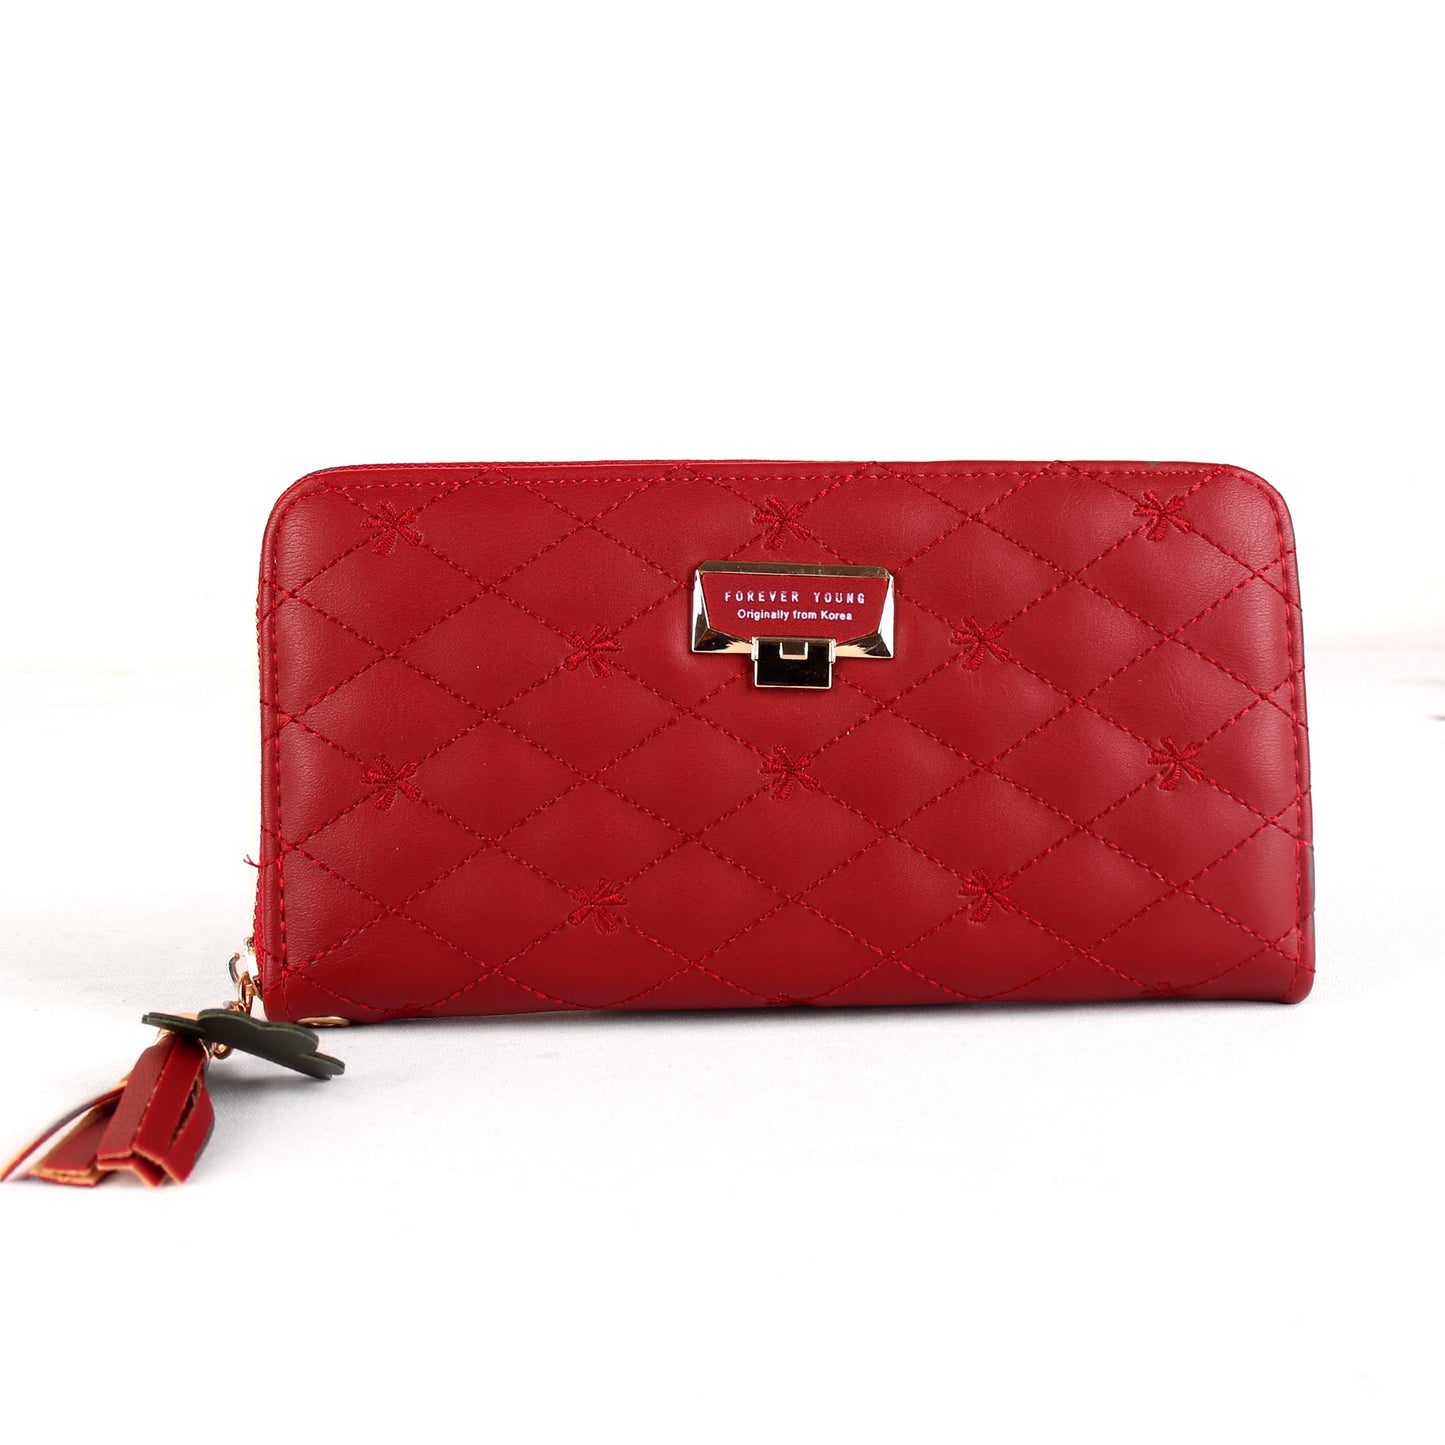 The Boxy inverted Clamped wallet with Tassels in Maroon